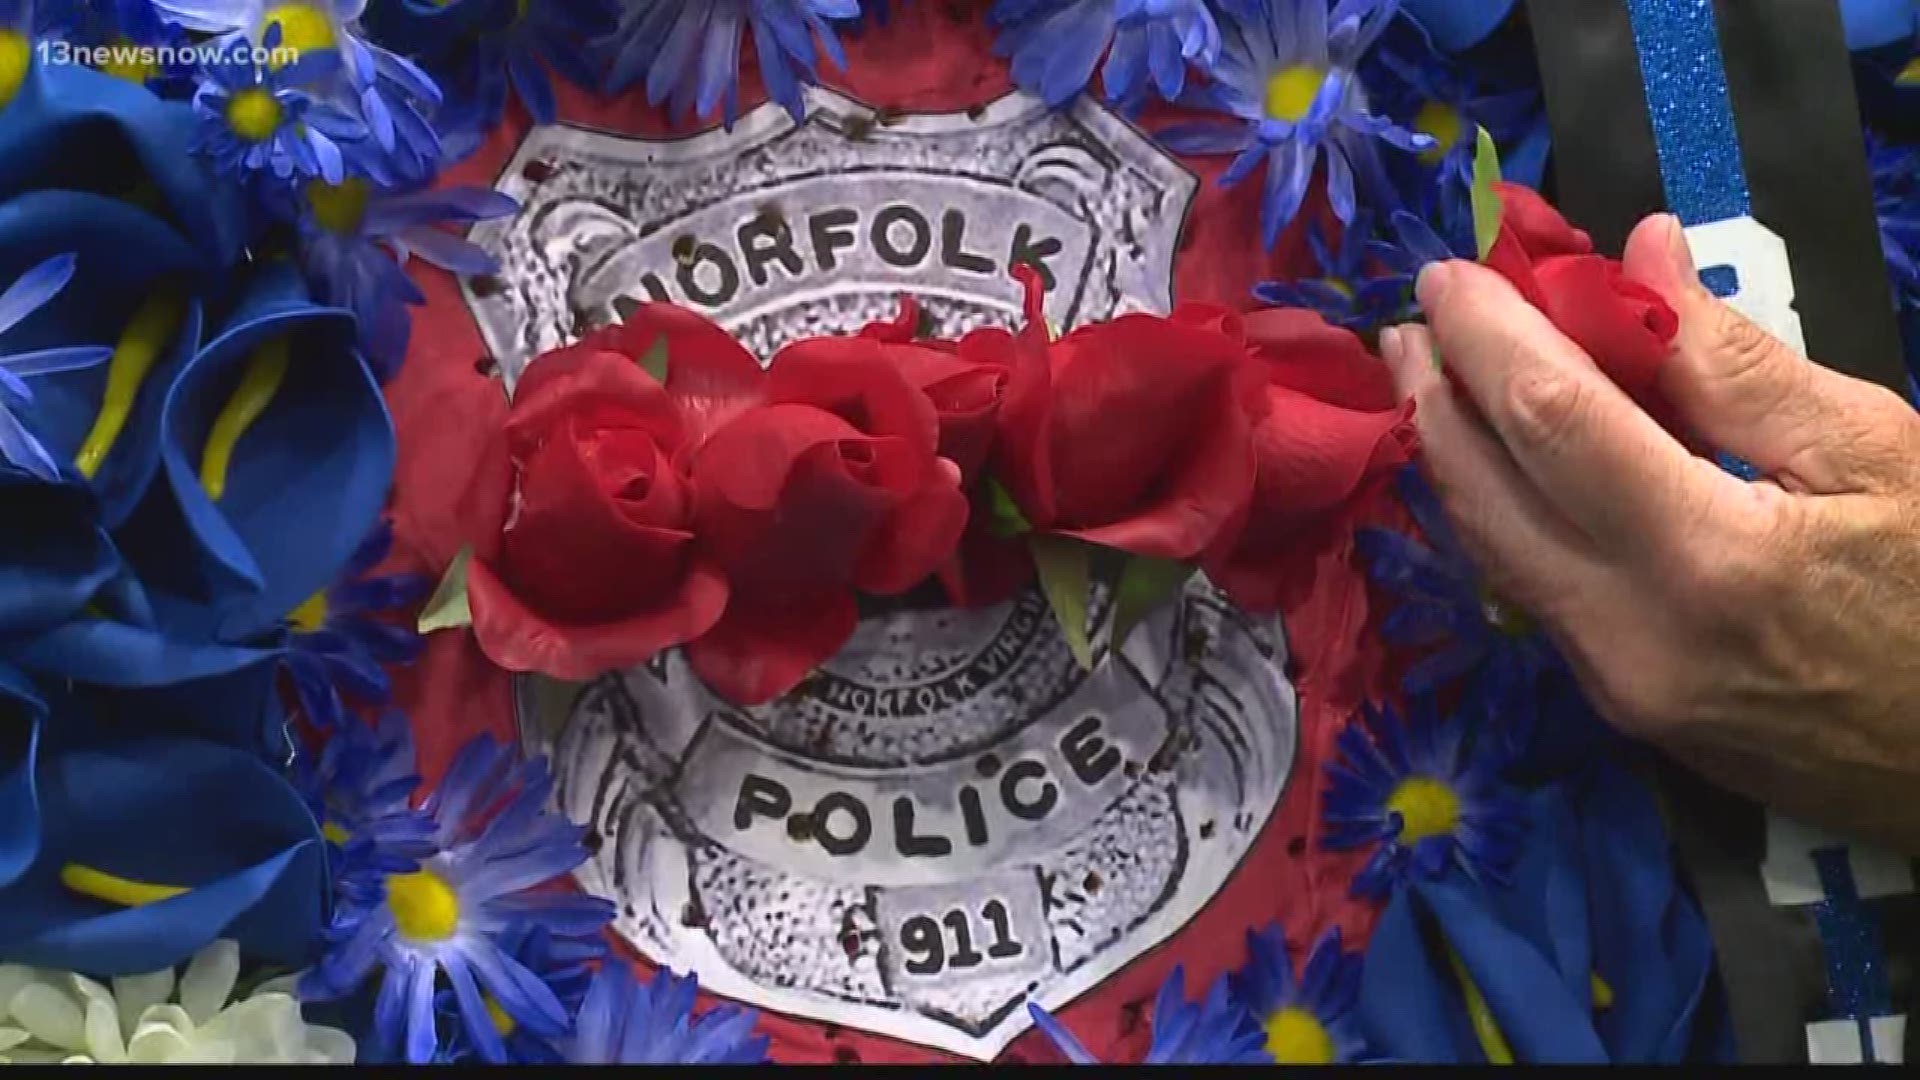 The annual Peace Officers' Memorial Day Service remembers 39 Norfolk police officers "who made the ultimate sacrifice."